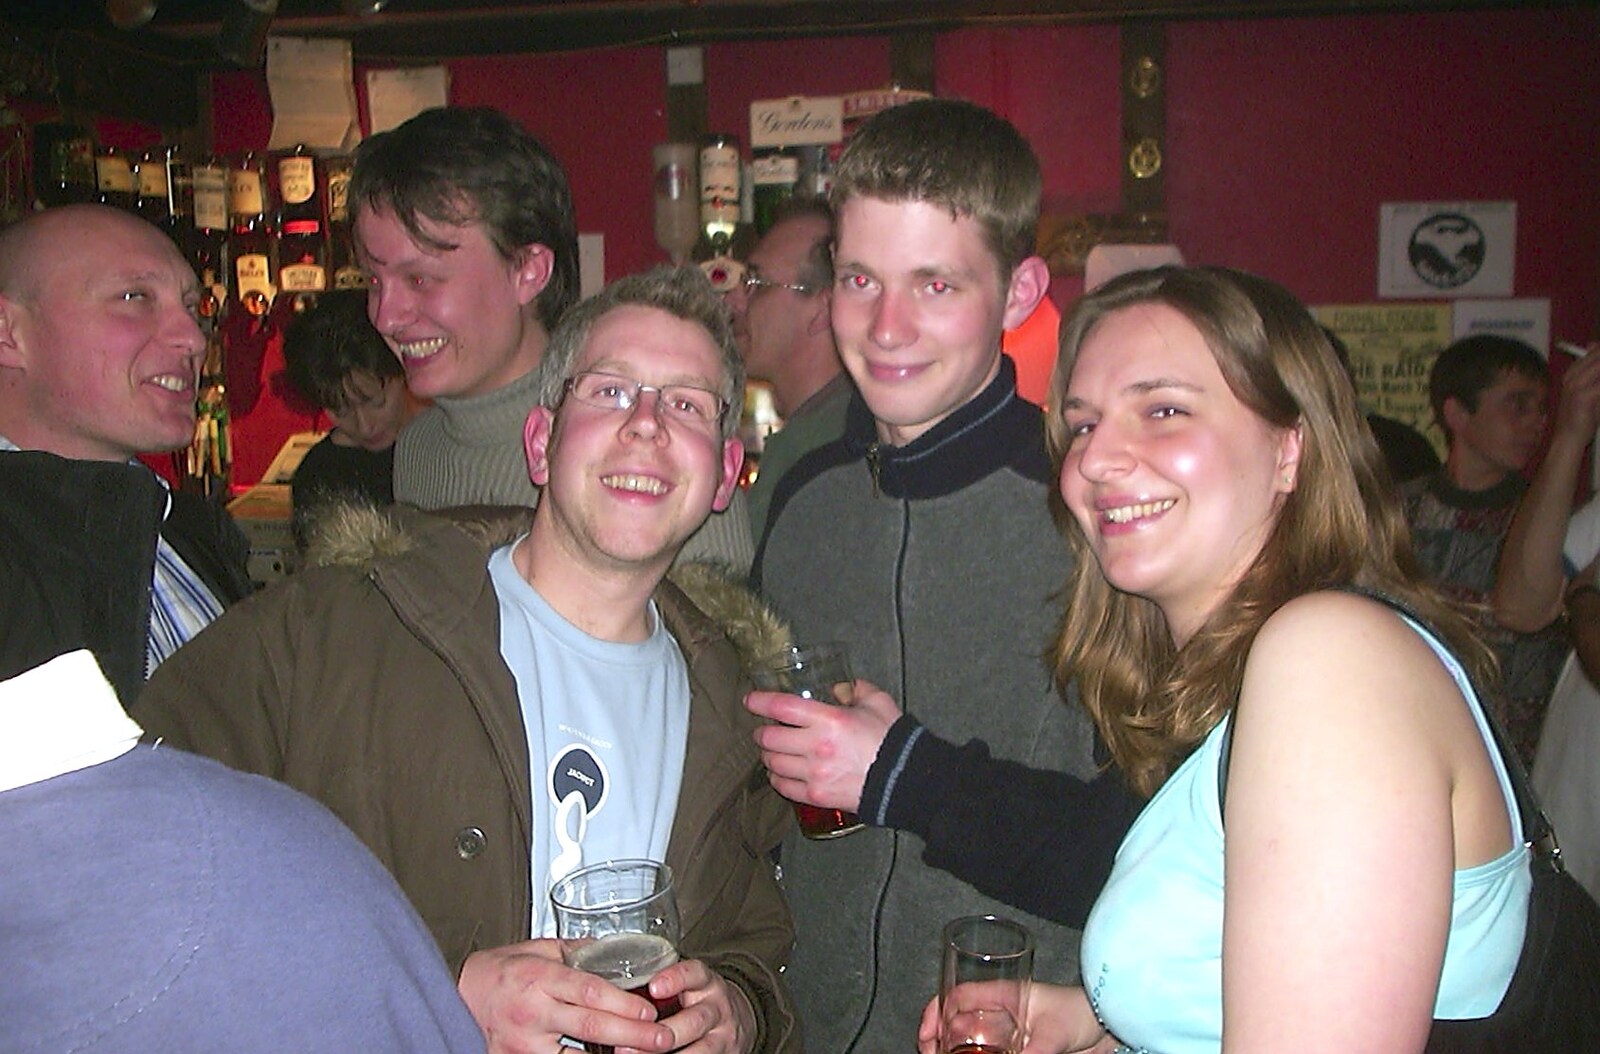 A March Miscellany: The BBs, Pulham Pubs and Broken Cars - Norfolk and Cambridgeshire, 31st March 2004: John, The Boy Phil and Jess